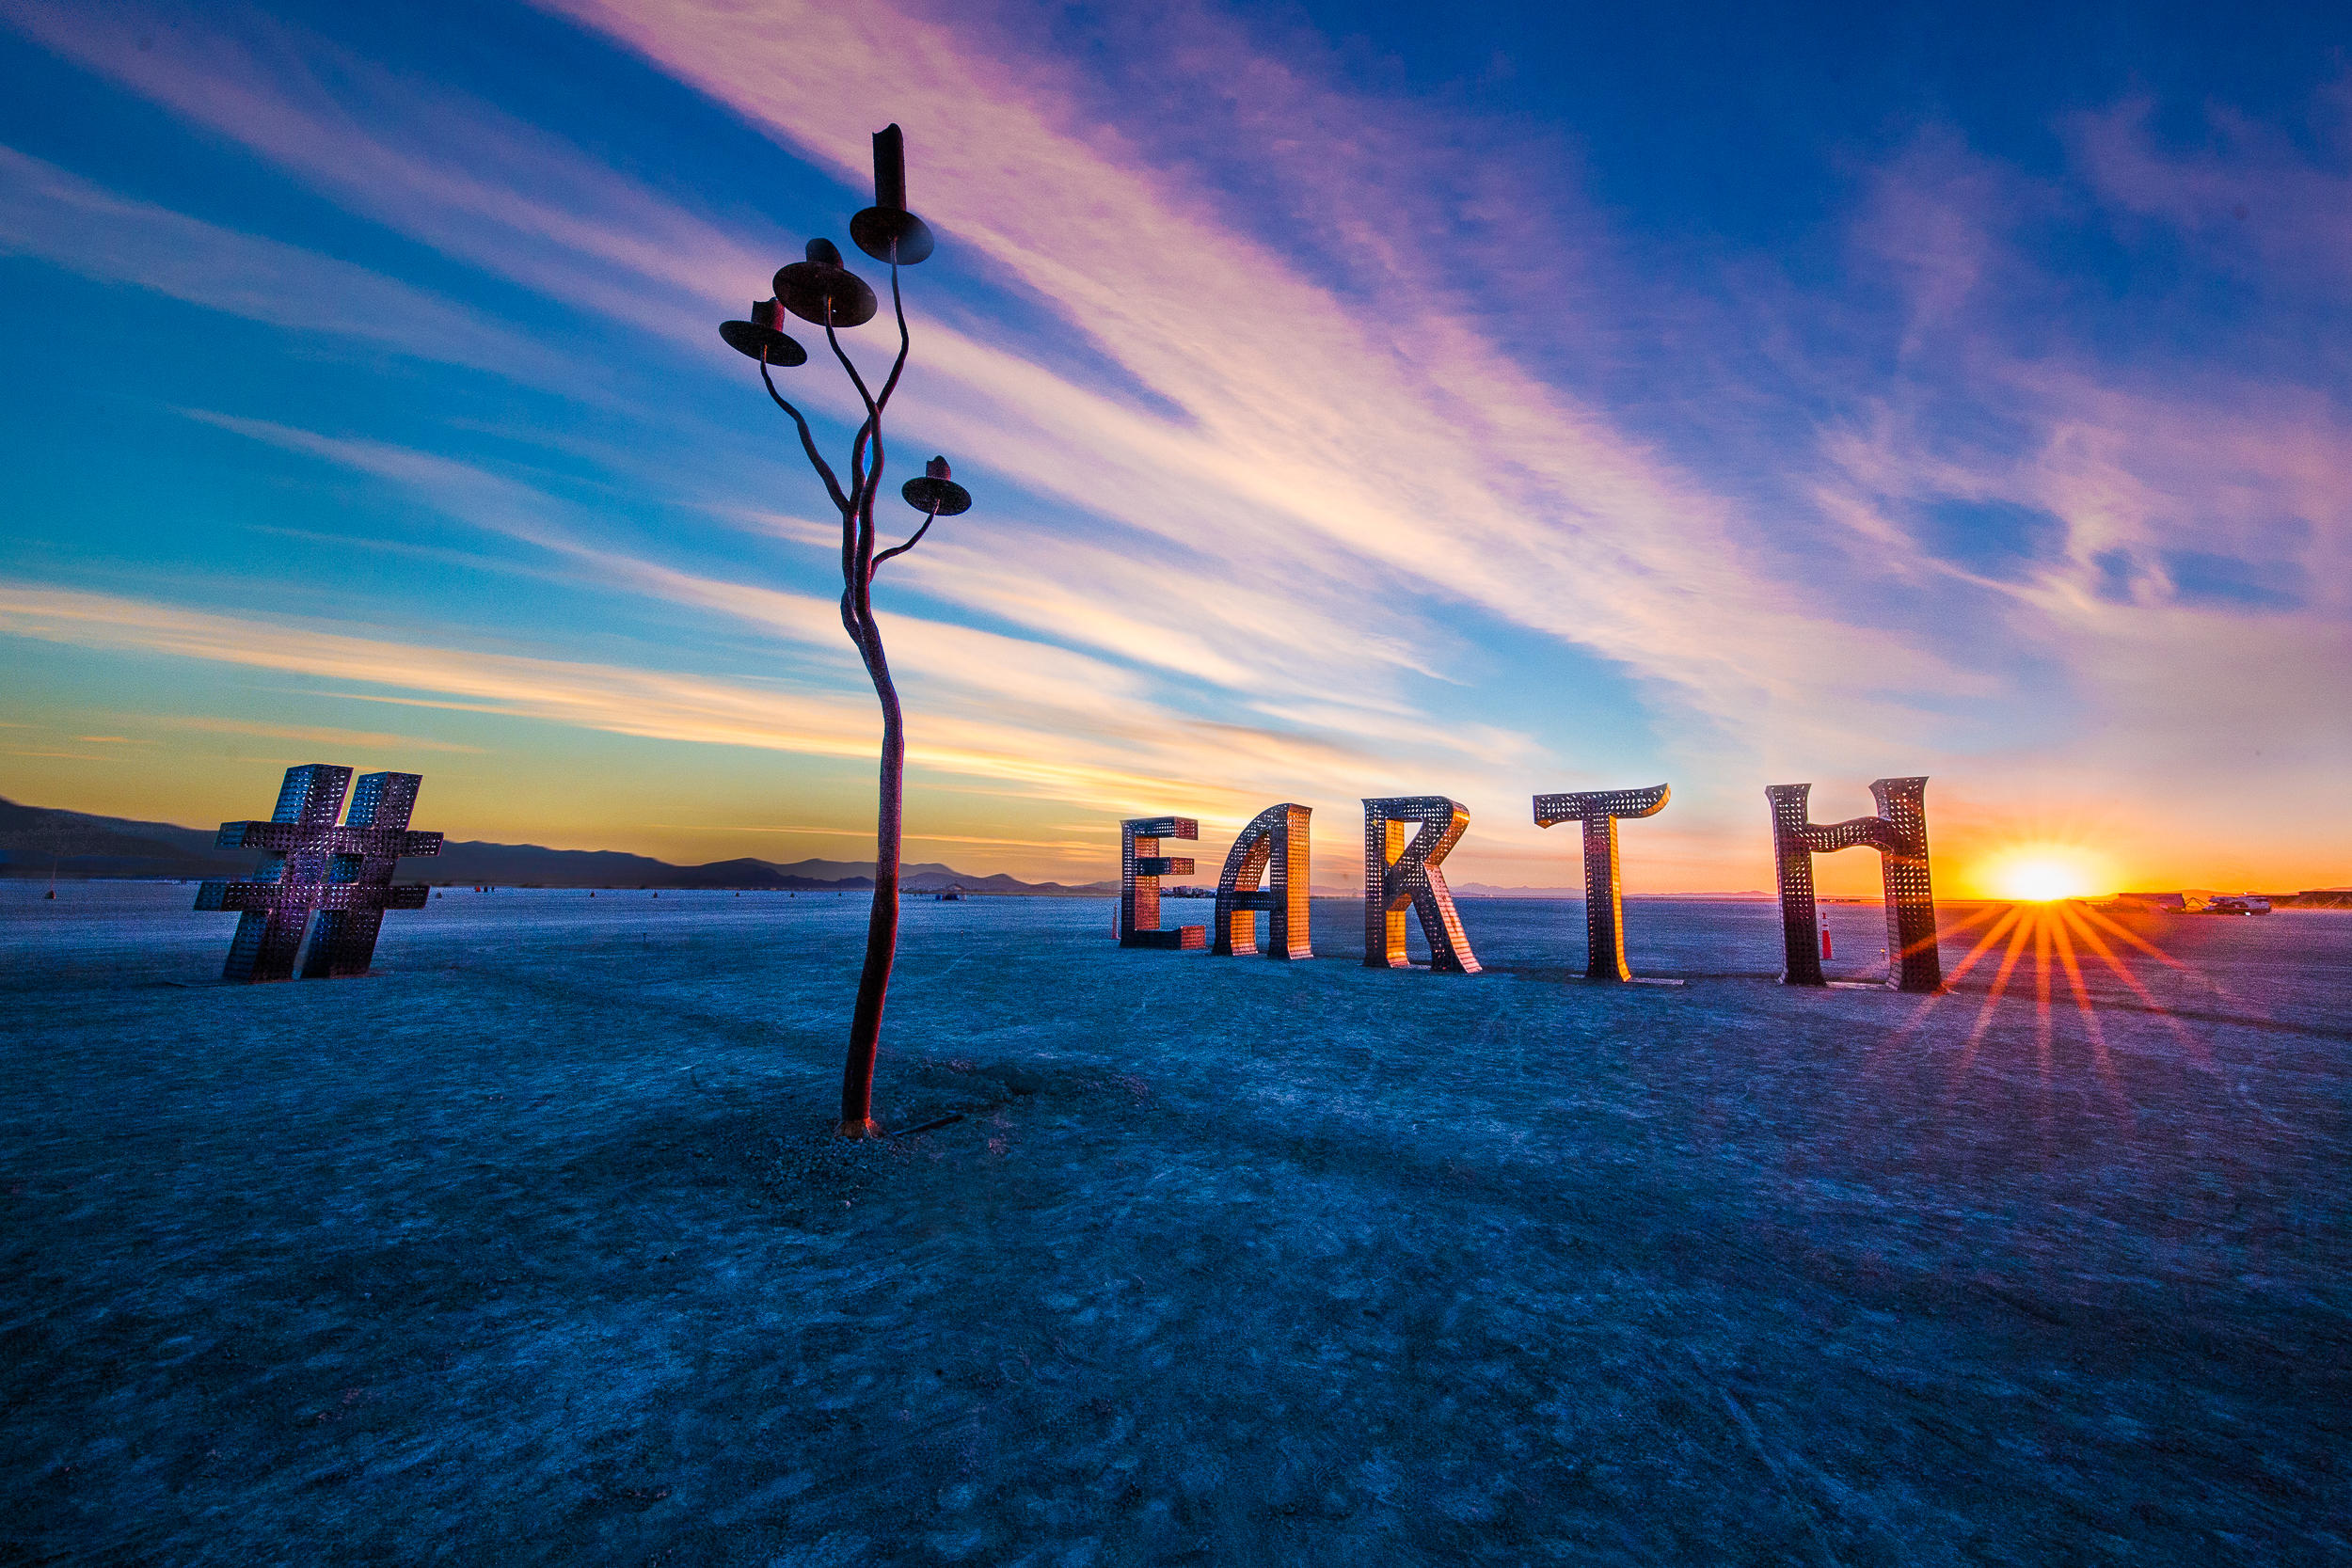 At Earth Hashtag Home image by Peter Ruprecht.jpg